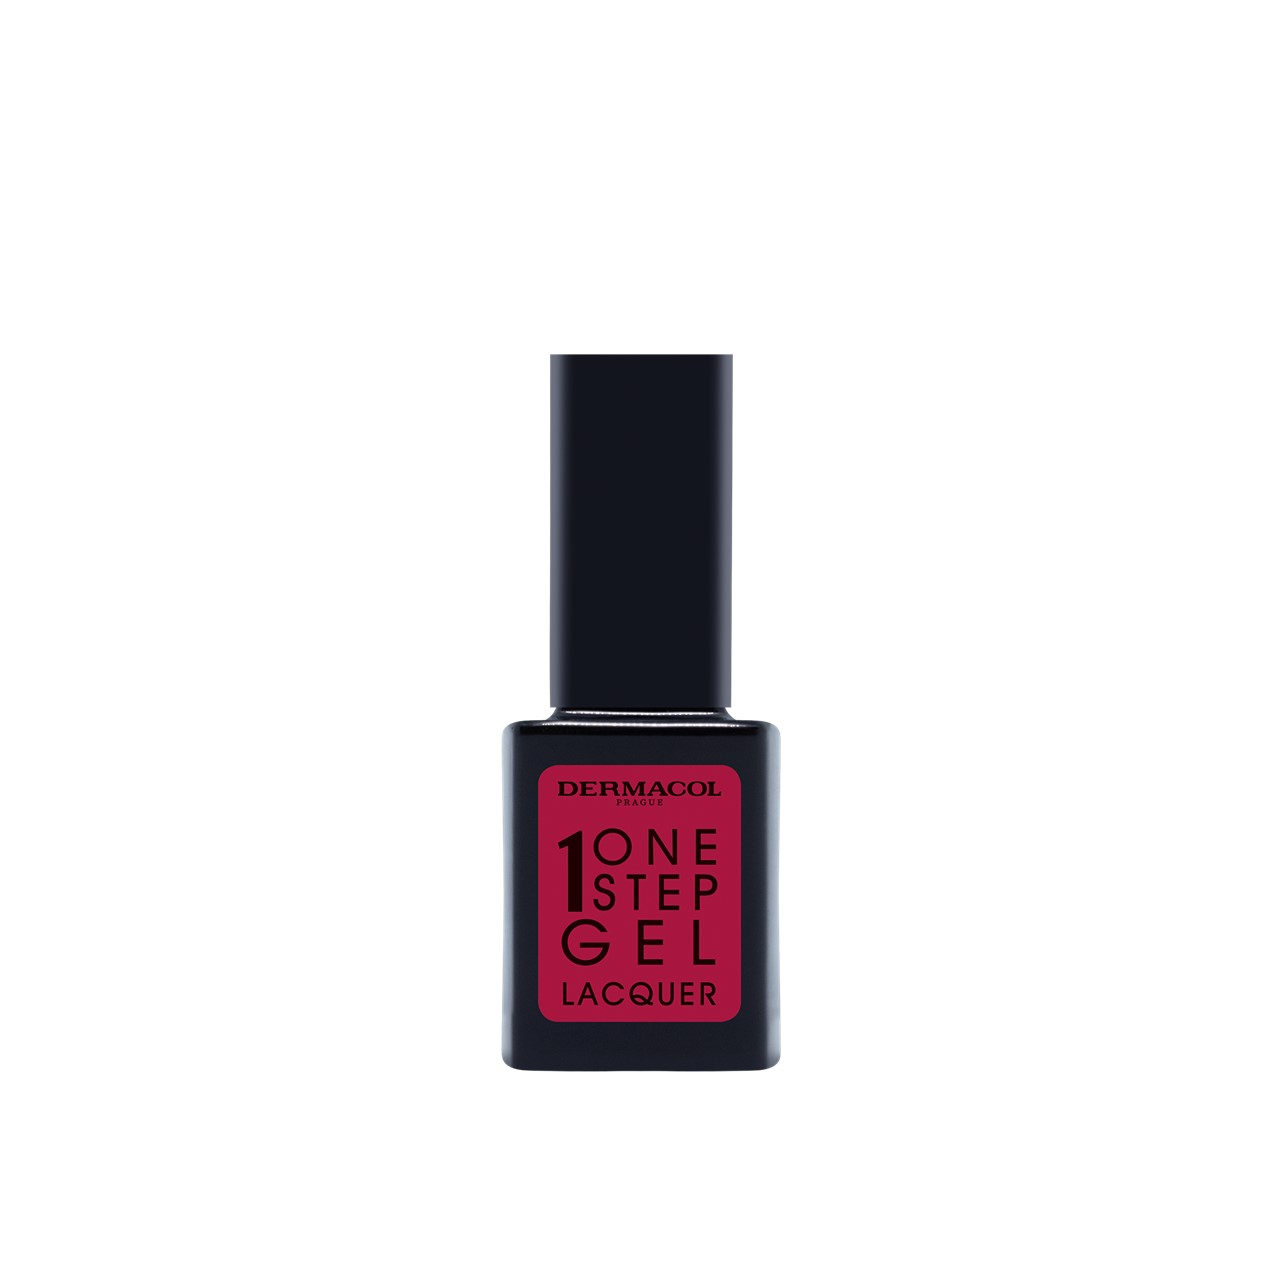 Dermacol One Step Gel Lacquer 05 Carmine Red 11ml